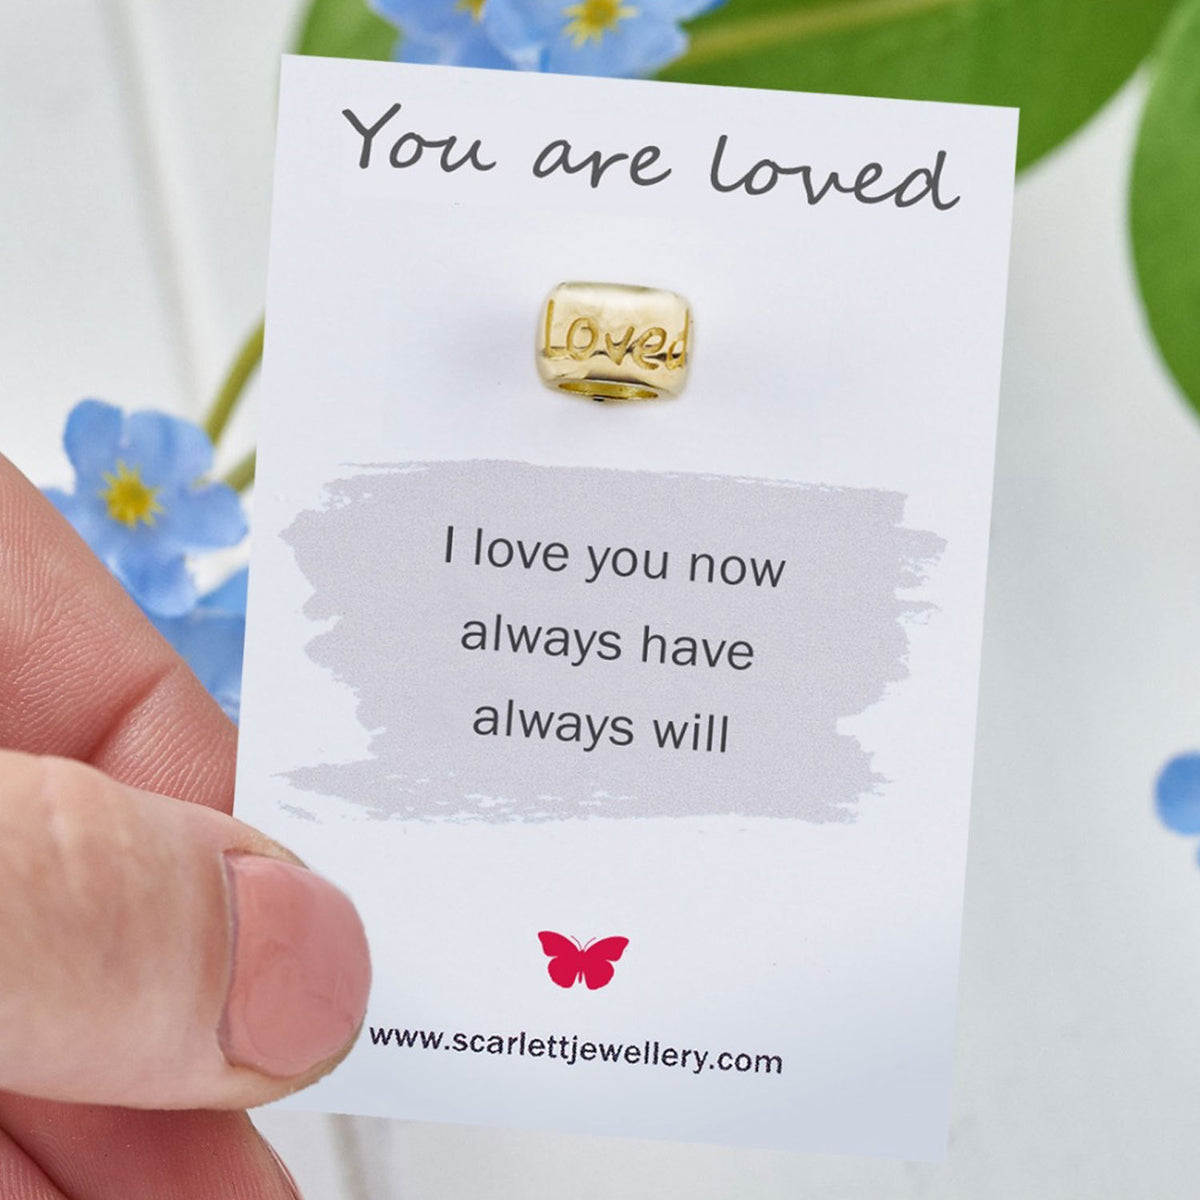 You are loved anniversary eco friendly recycled gold charm bead Scarlett Jewellery